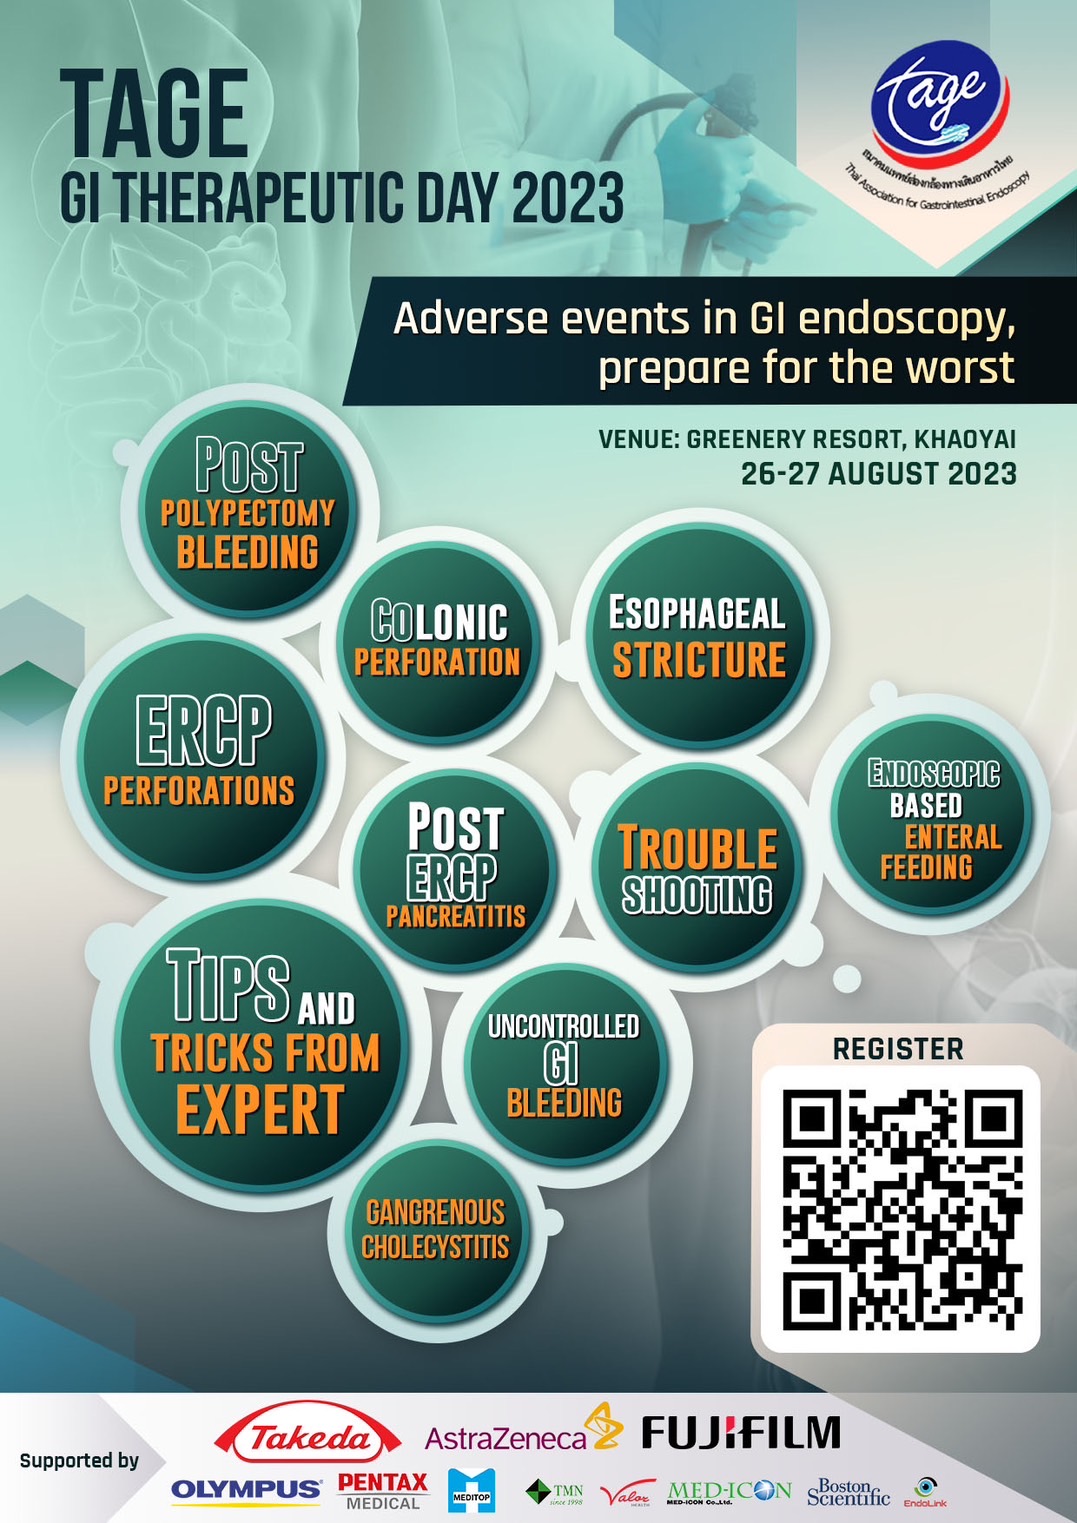 TAGE - GI THERAPEUTIC DAY 2023 Adverse events in Gl endoscopy, prepare for the worst